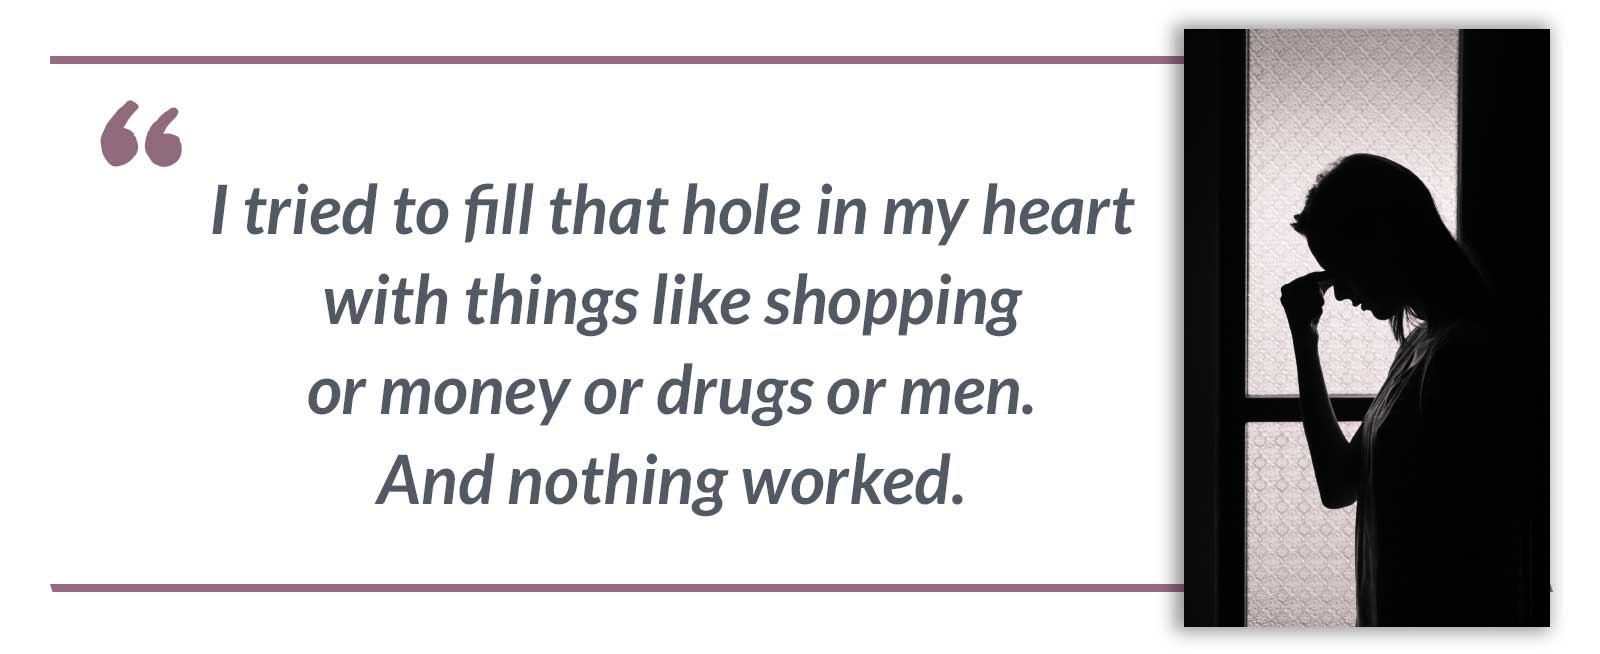 I tried to fill that hole in my heart with things like shopping or money or drugs or men. And nothing worked.-Chelsea